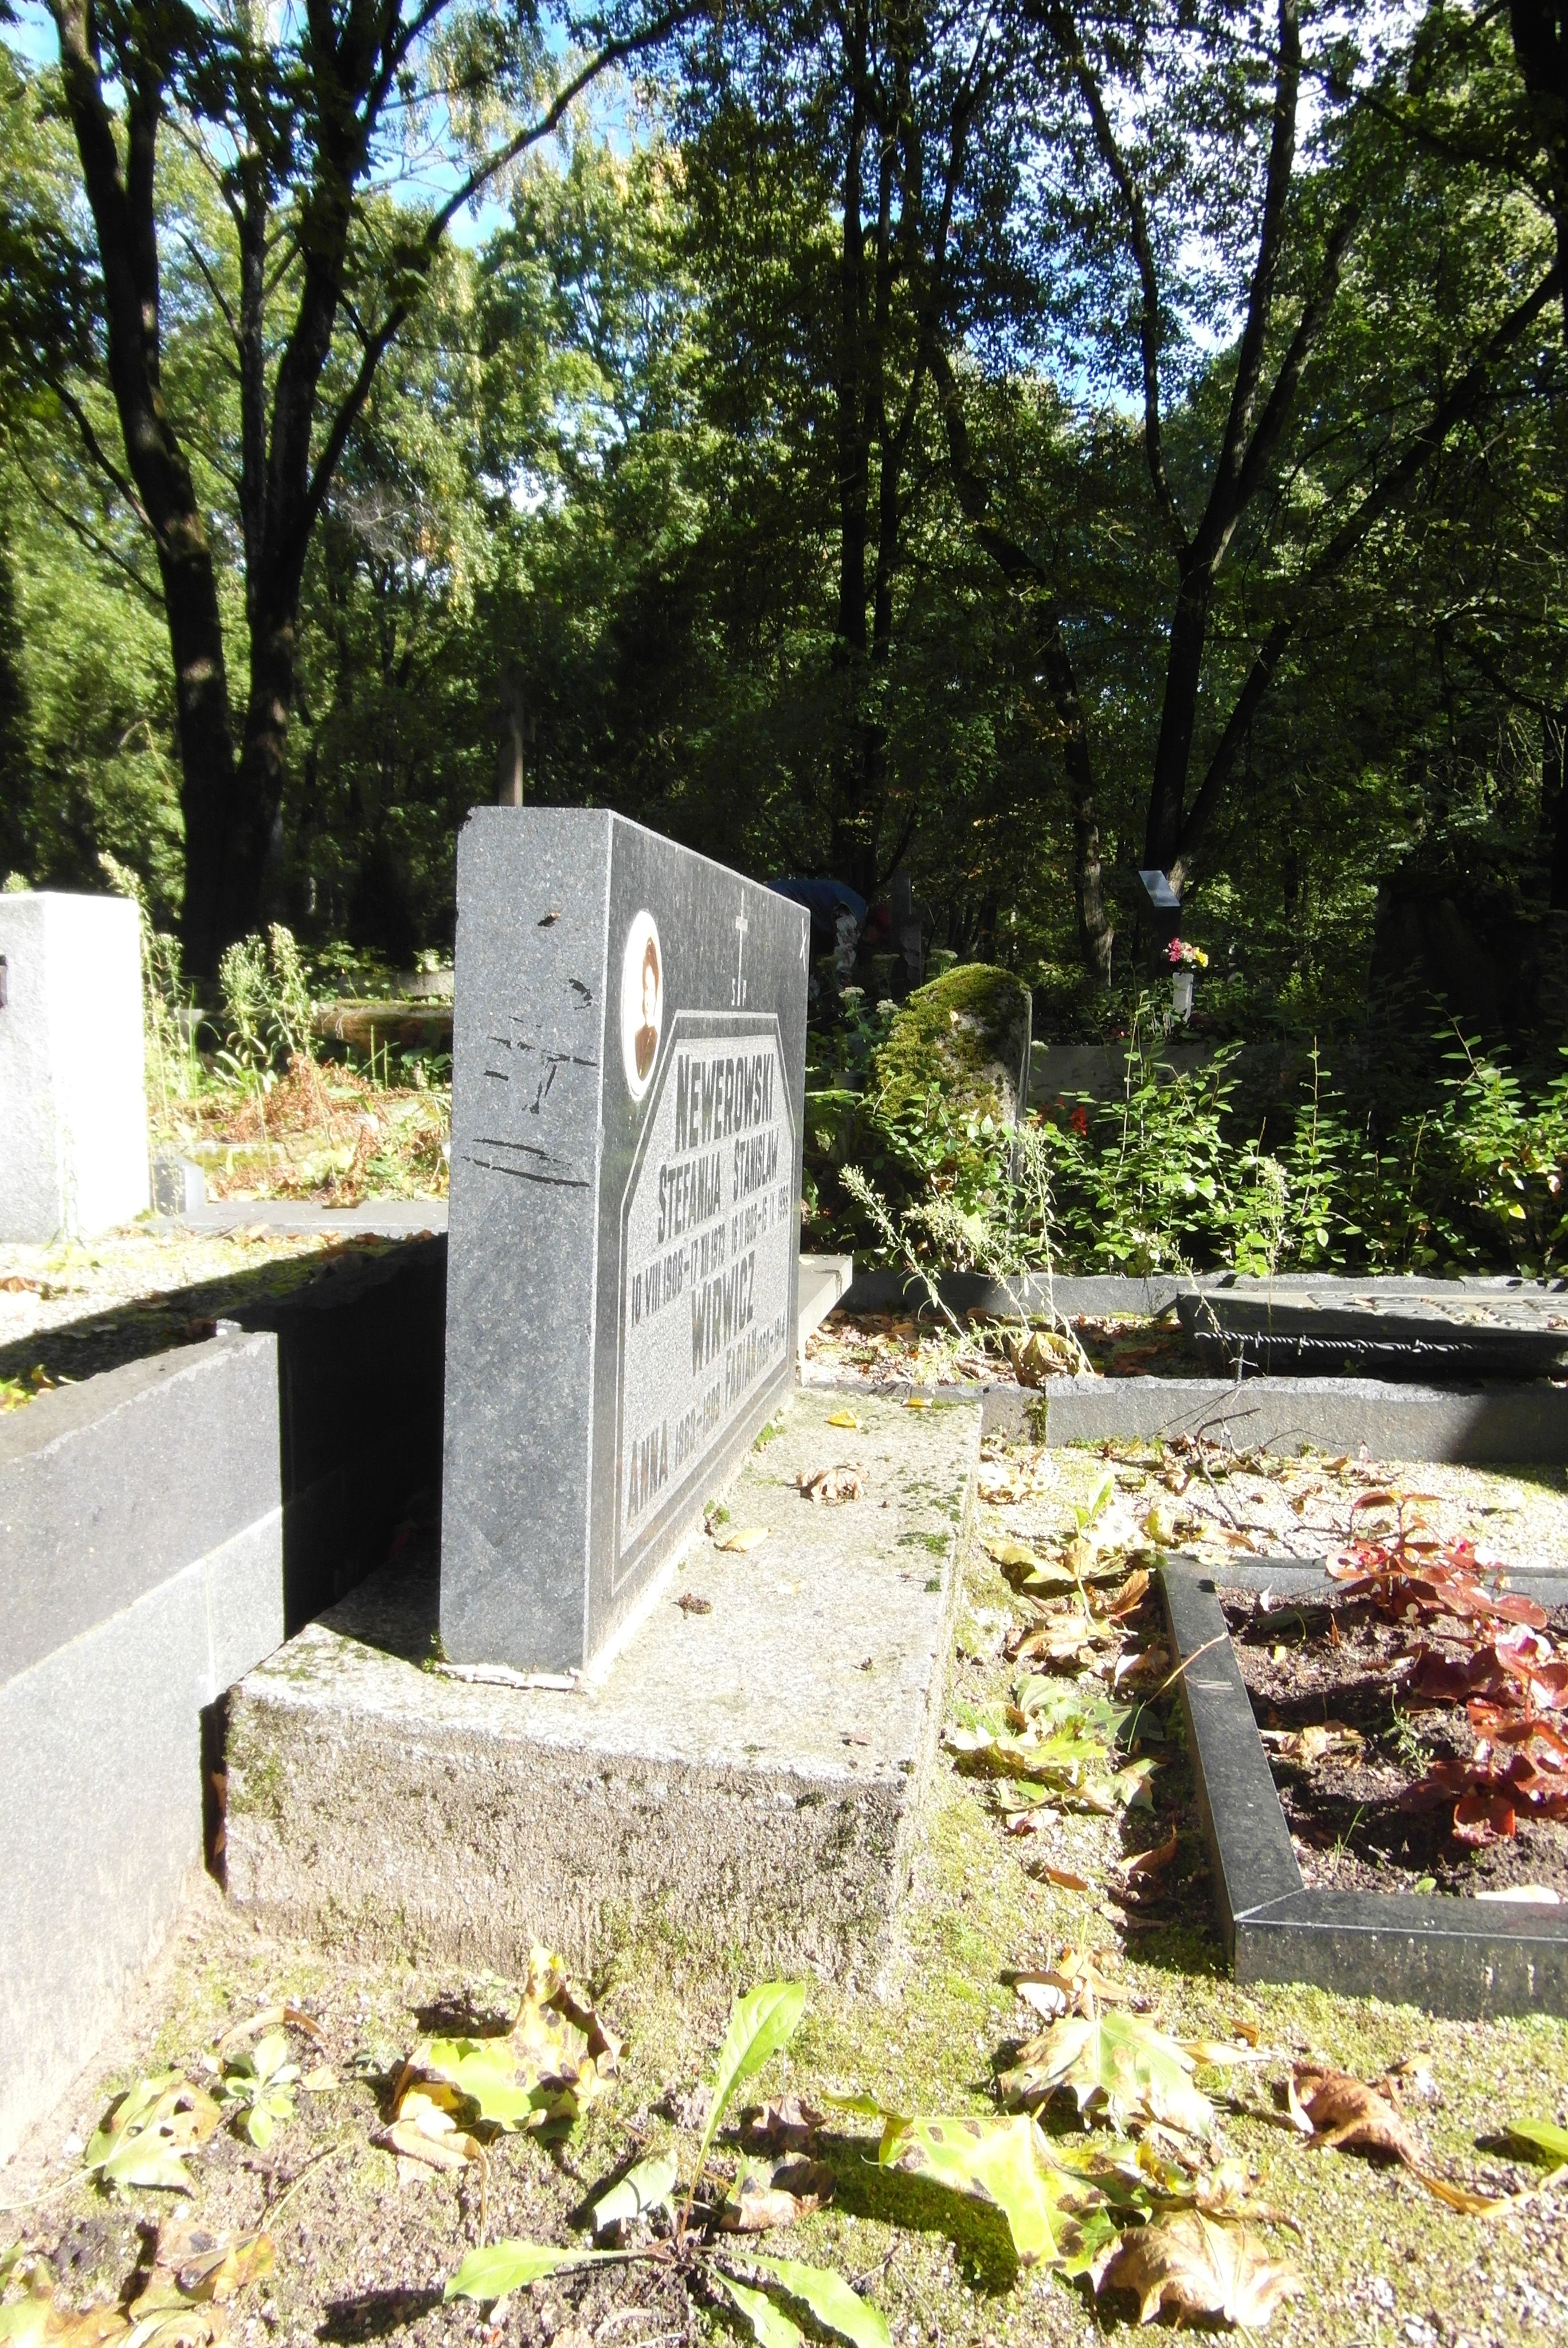 Tombstone of the Neverovski and Wirvich families, St Michael's cemetery in Riga, as of 2021.